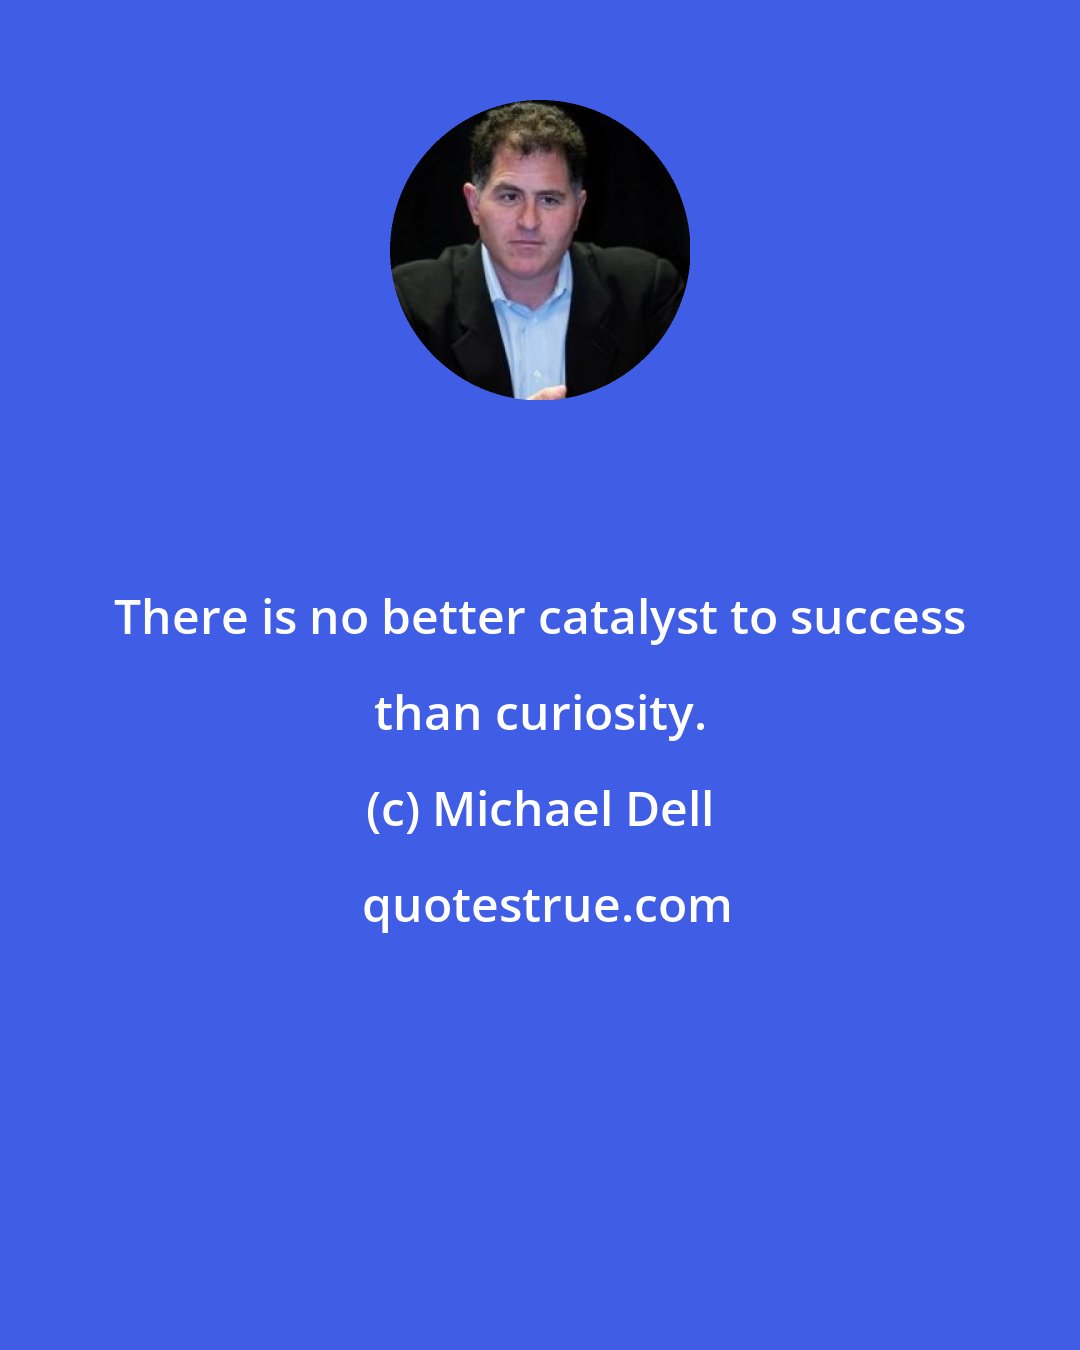 Michael Dell: There is no better catalyst to success than curiosity.